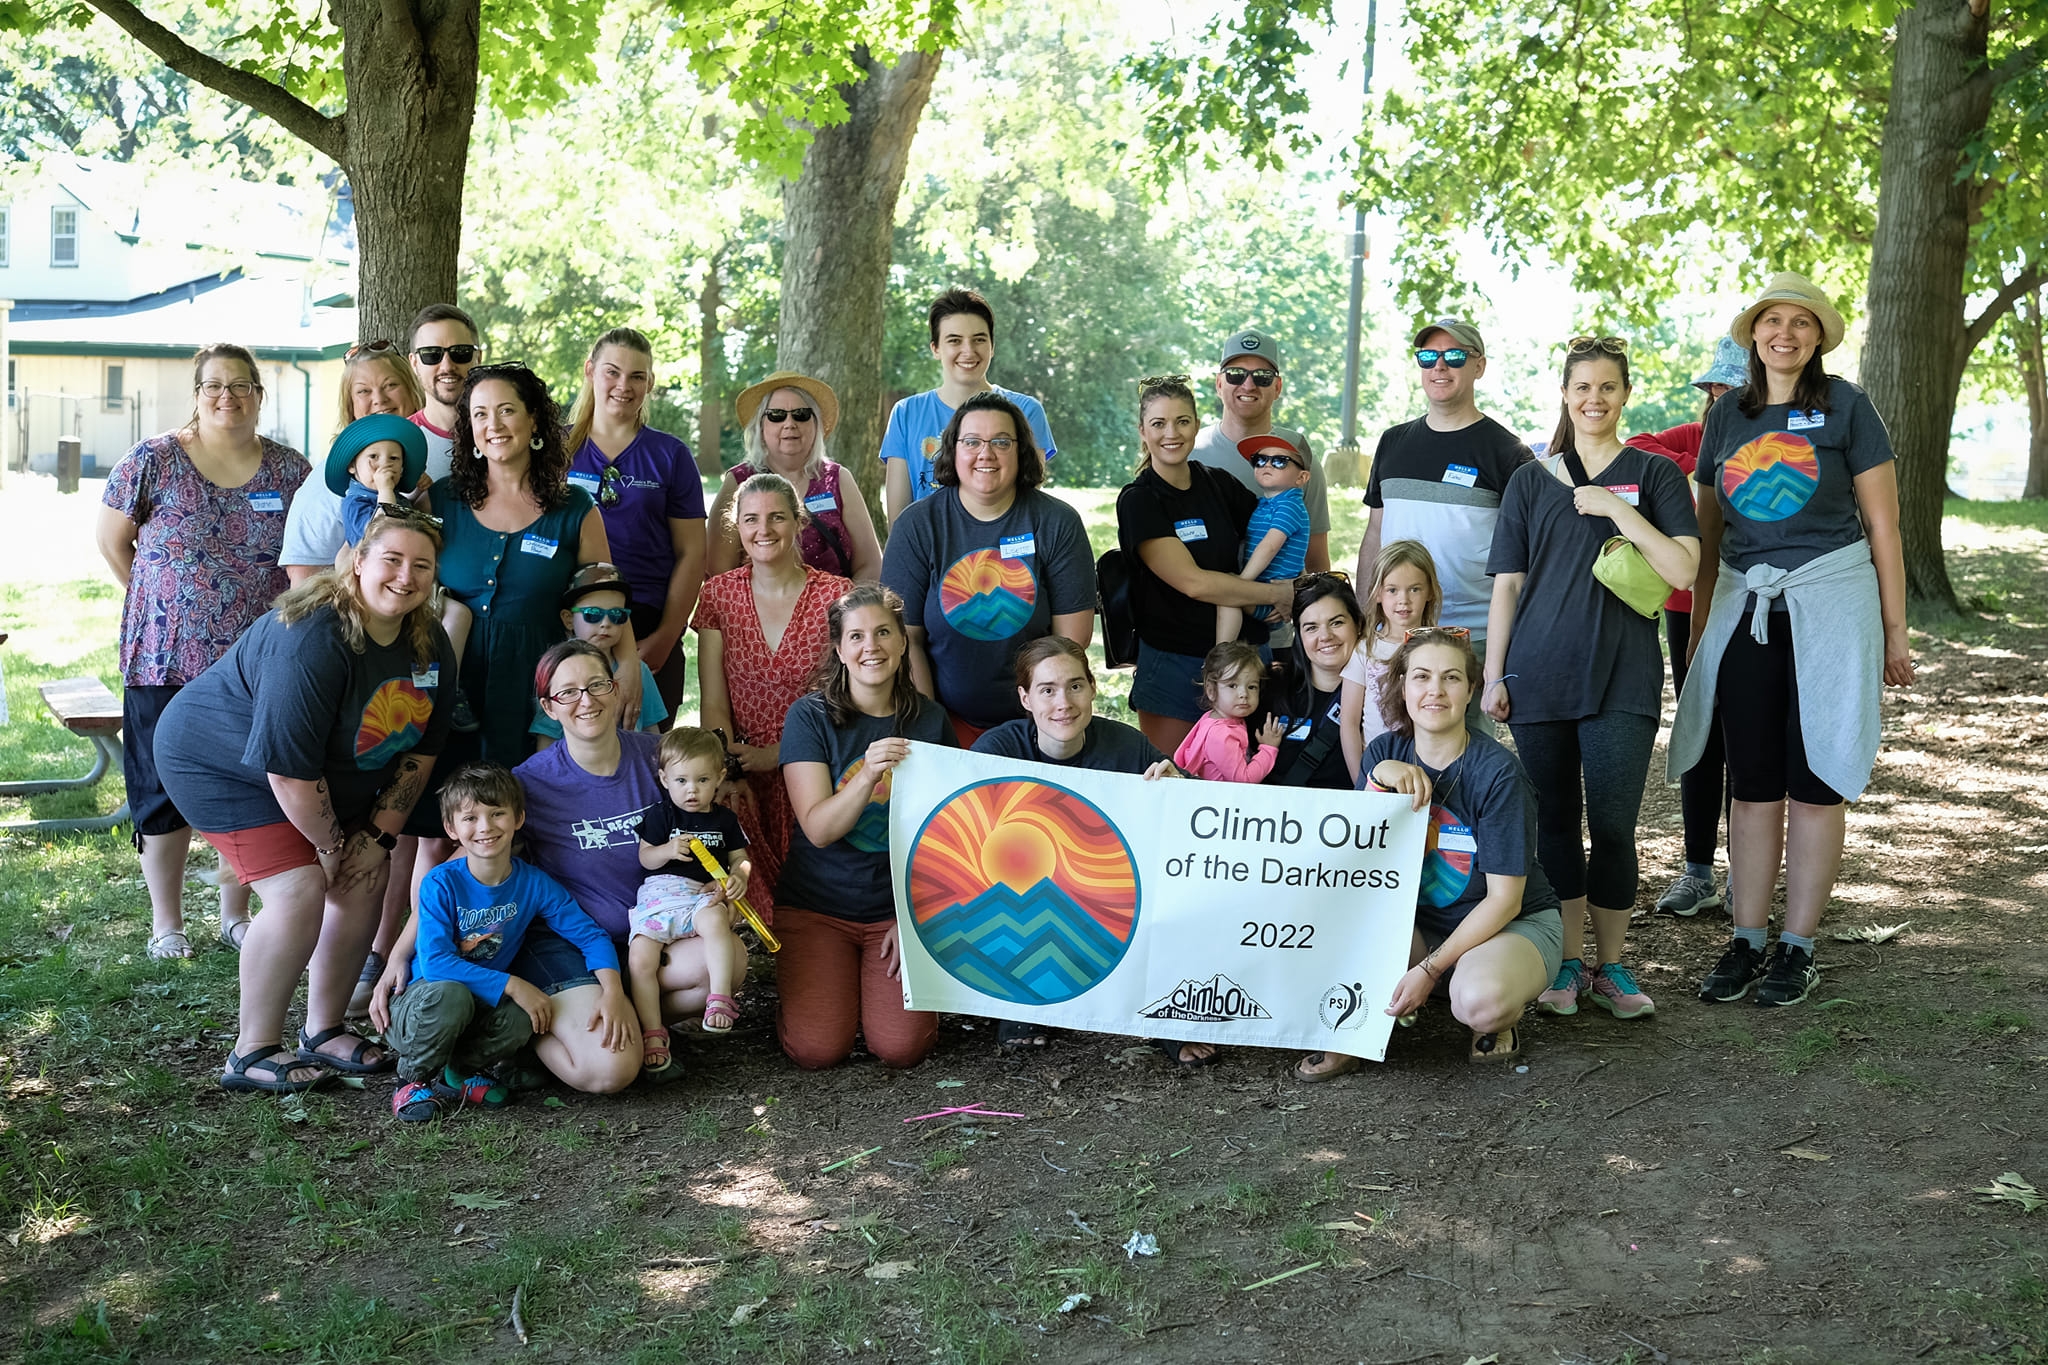 A gathering of people, ranging from one year to grey hair, at the front, a few are holding a banner that has the 10th anniversary climb logo and says "Climb out of the darkness 2022" on it.